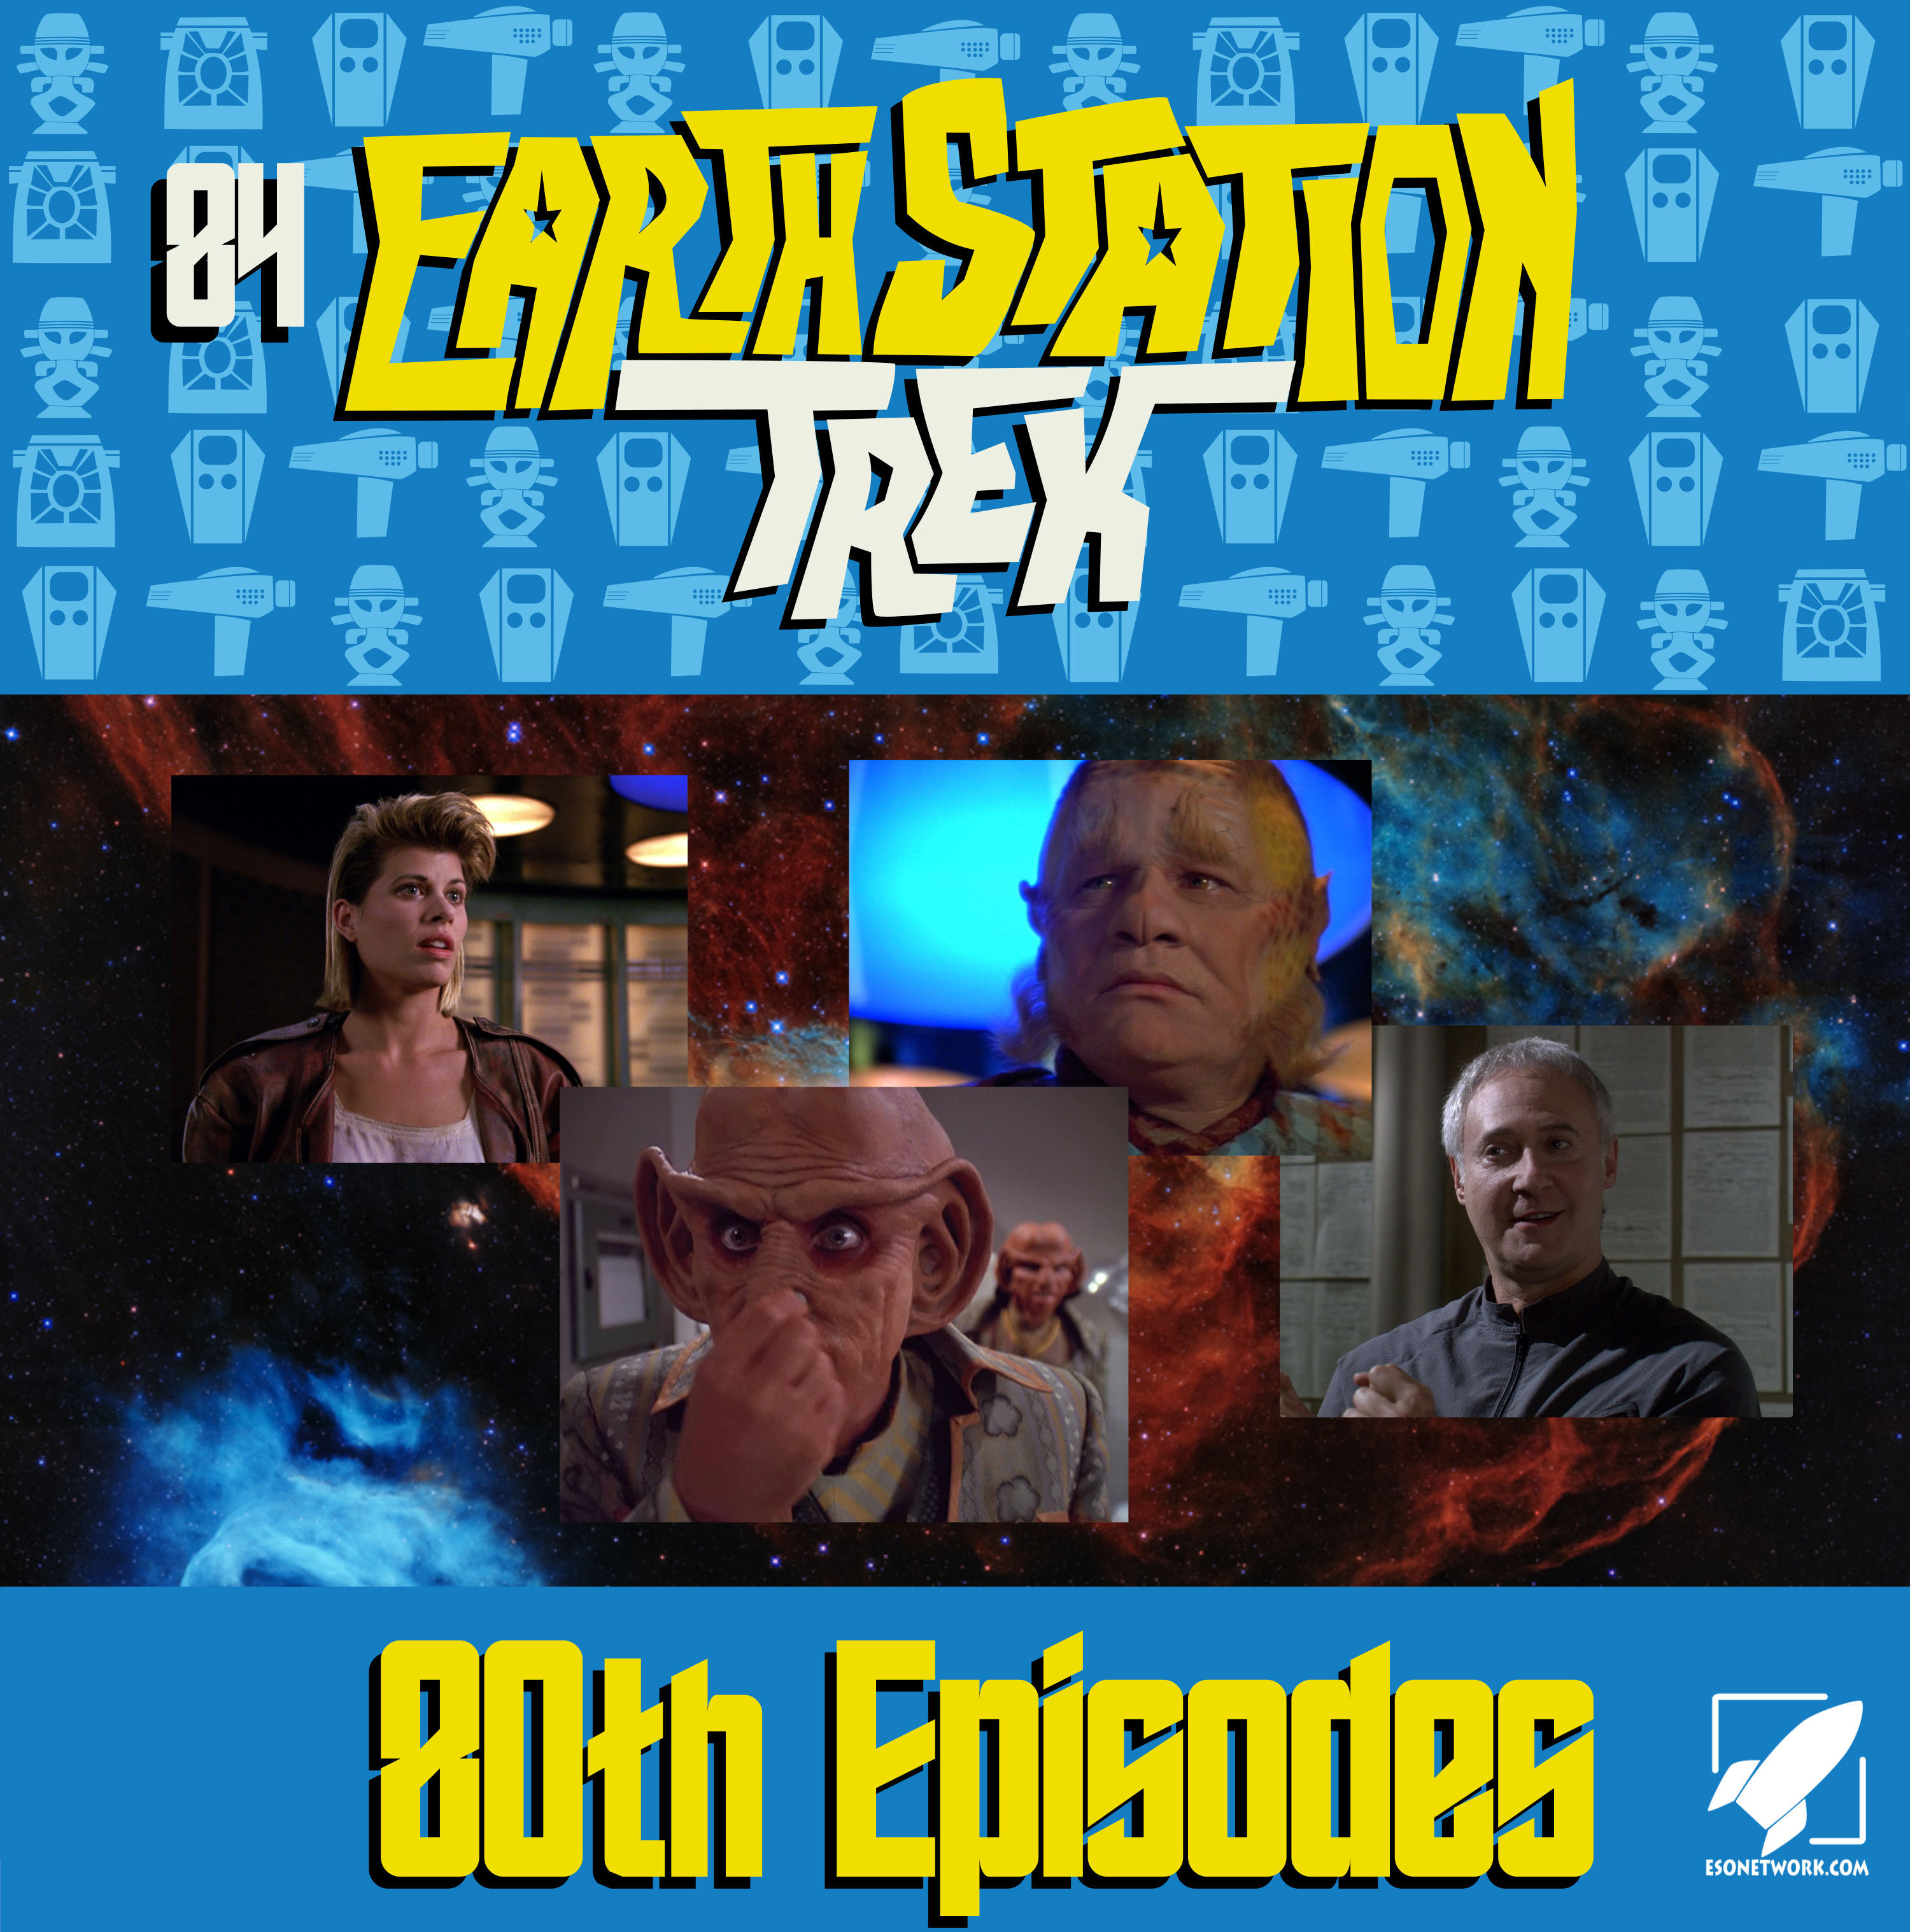 80th_Episodes_Podcast_graphic9wh8w.jpg